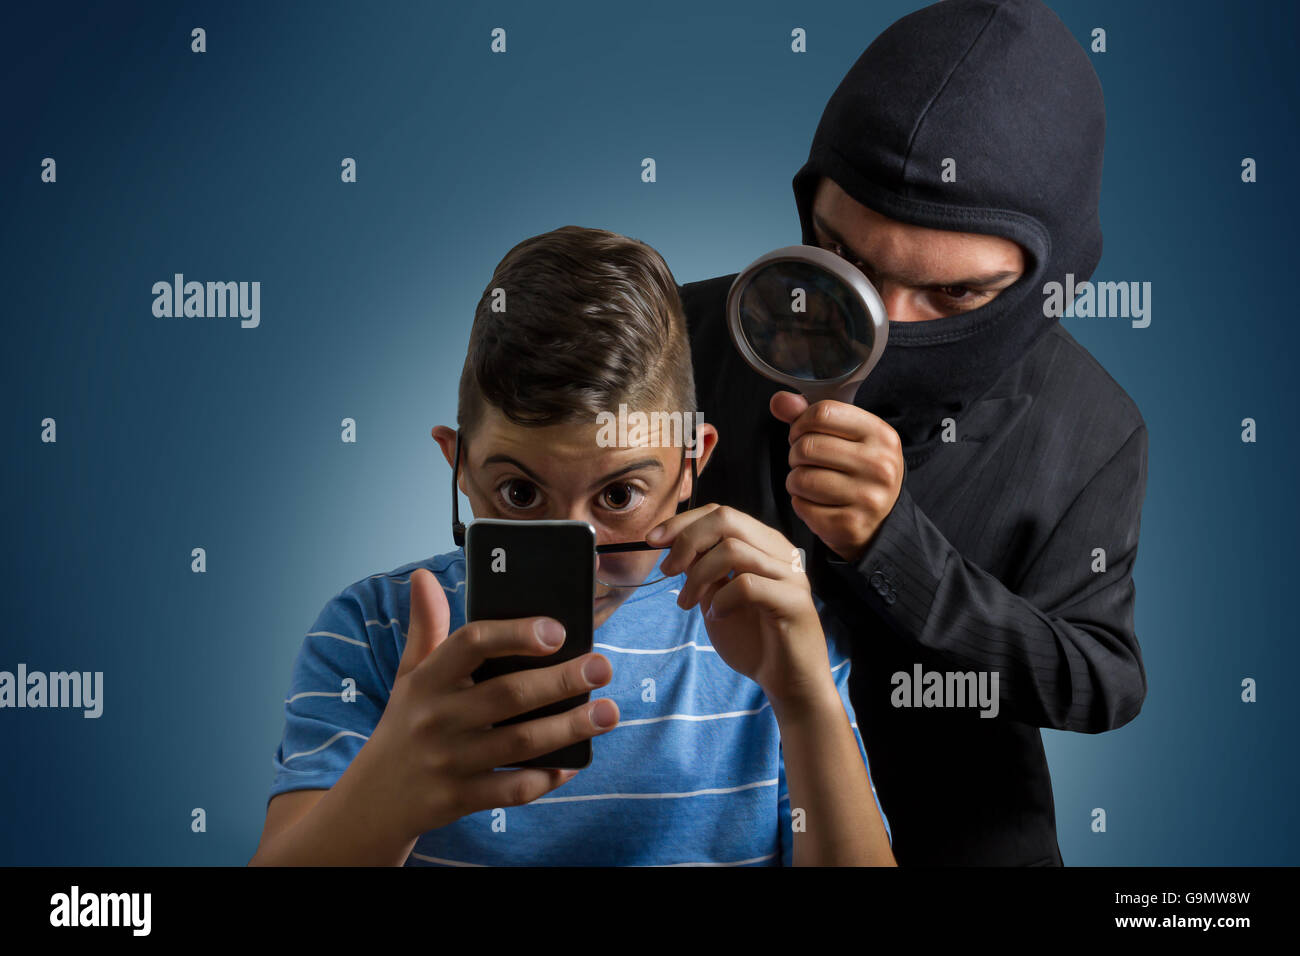 comic masked man spying data from smartphone of teenager Stock Photo